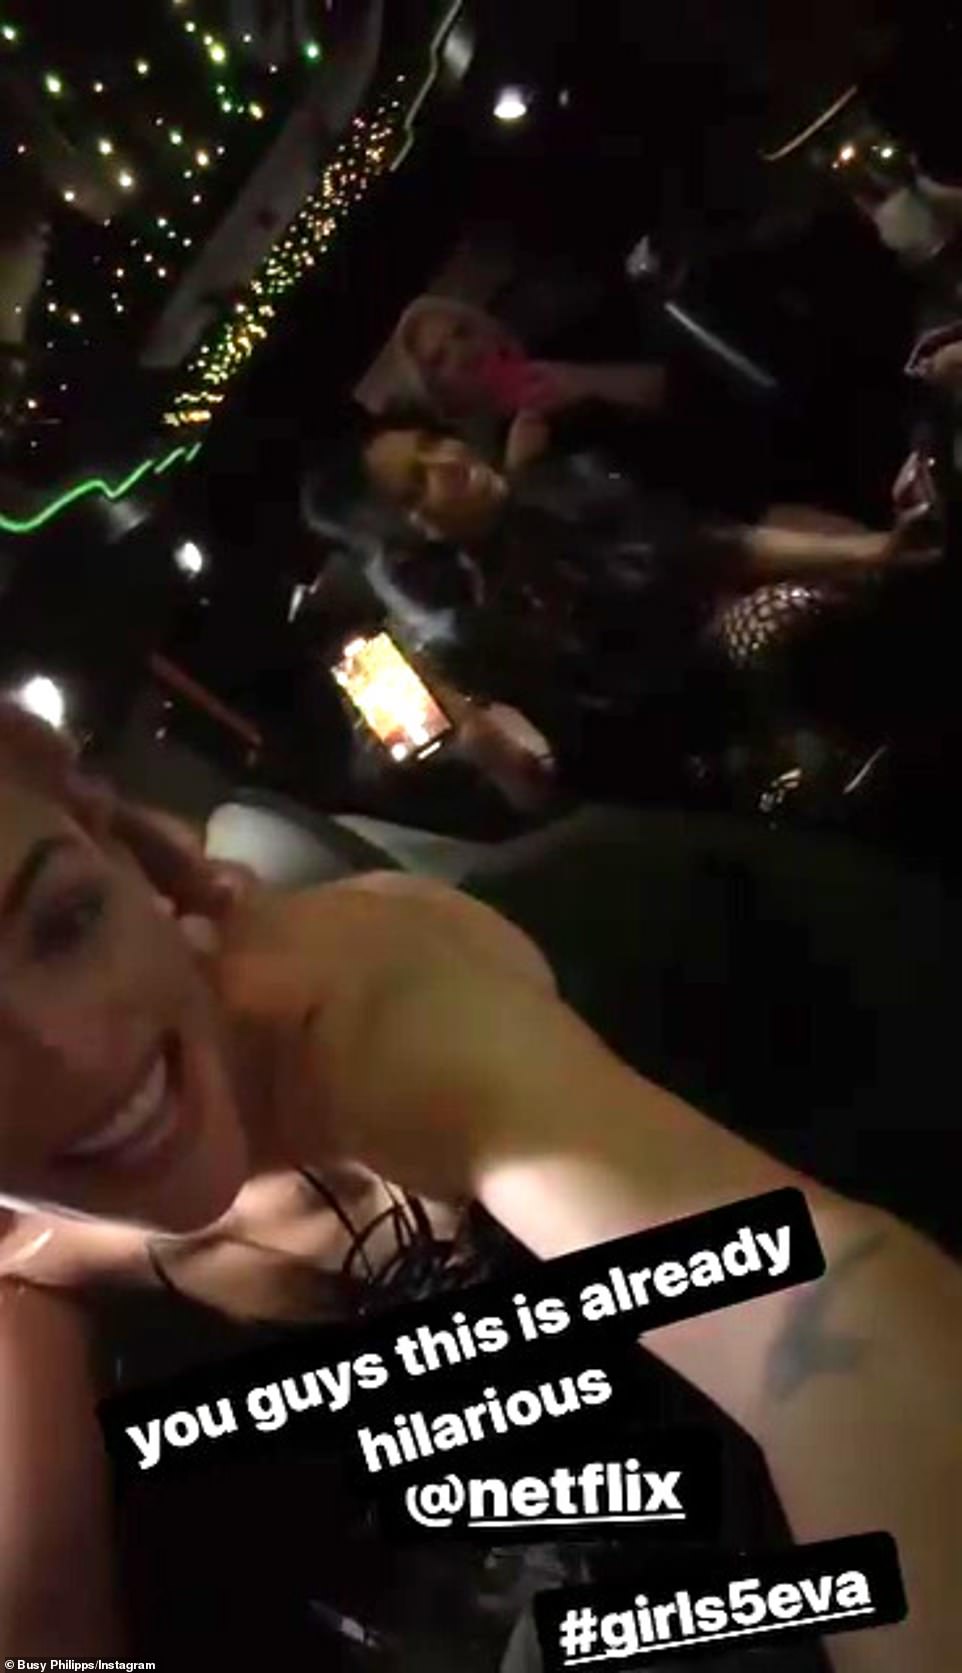 The La V brand ambassador - who boasts 2.4M Instagram followers - Instastoried a chaotic video of herself unable to sit in the dress while cruising in Hummer limousine with her castmates: 'You guys this is already hilarious'